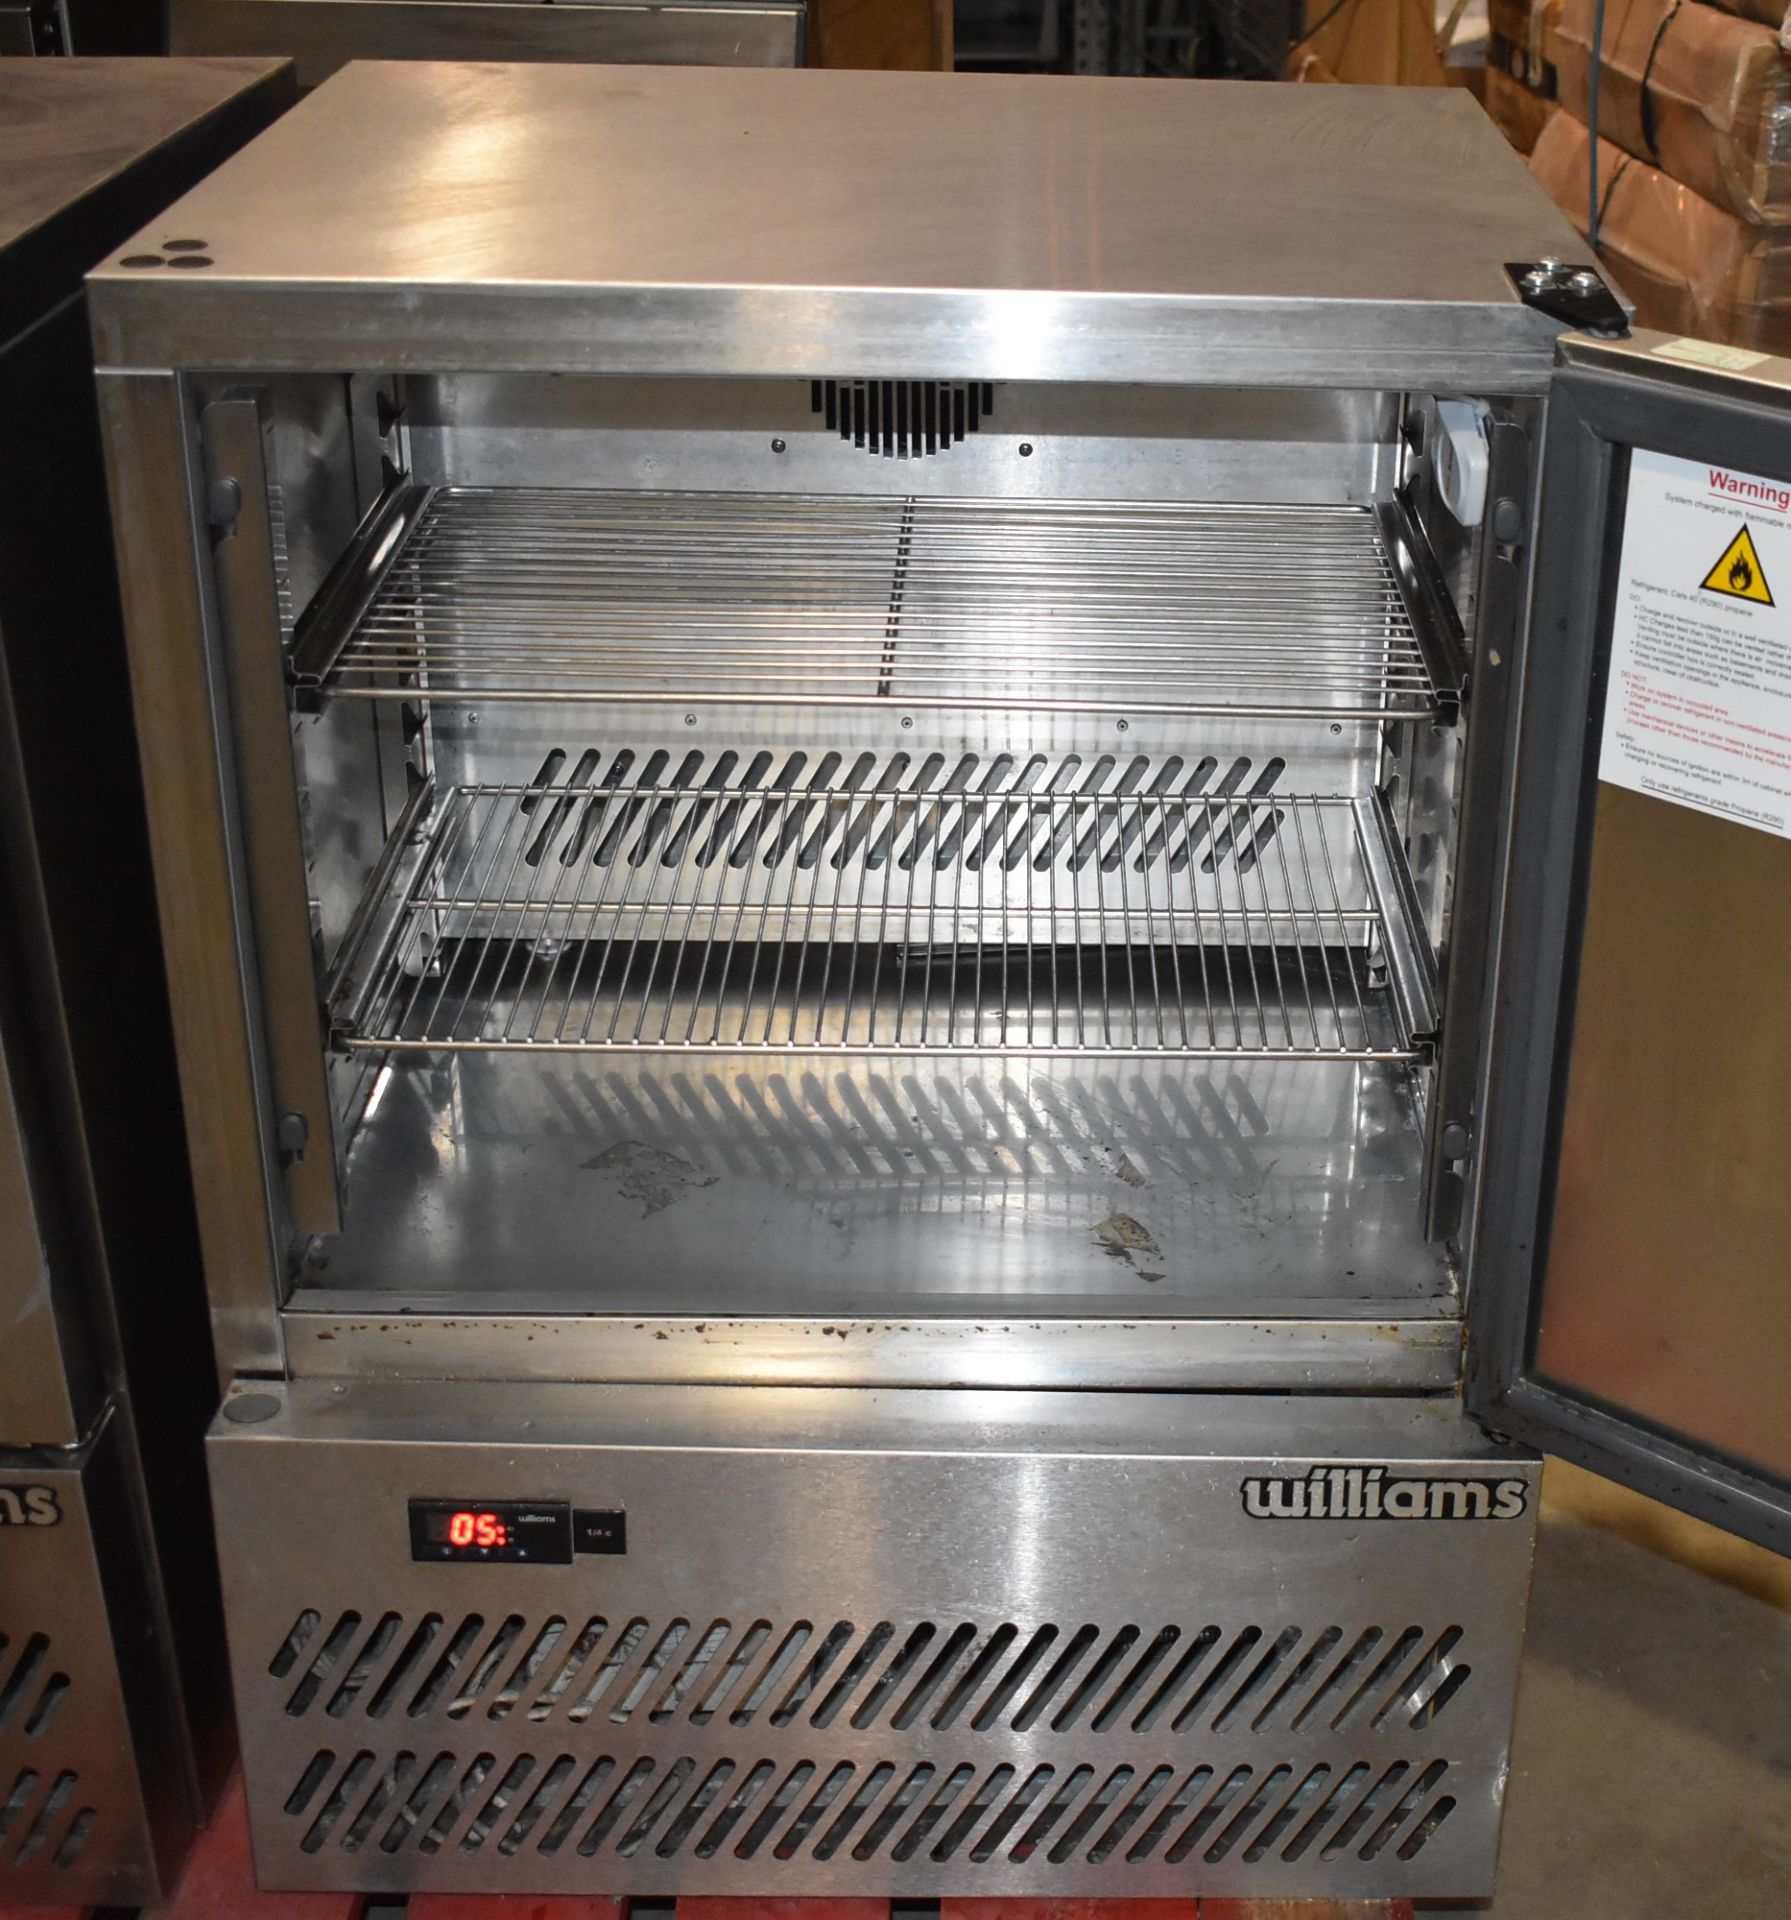 1 x Williams H5UC Single Door Stainless Steel Undercounter Fridge With Easy Grab Handle - Image 5 of 5